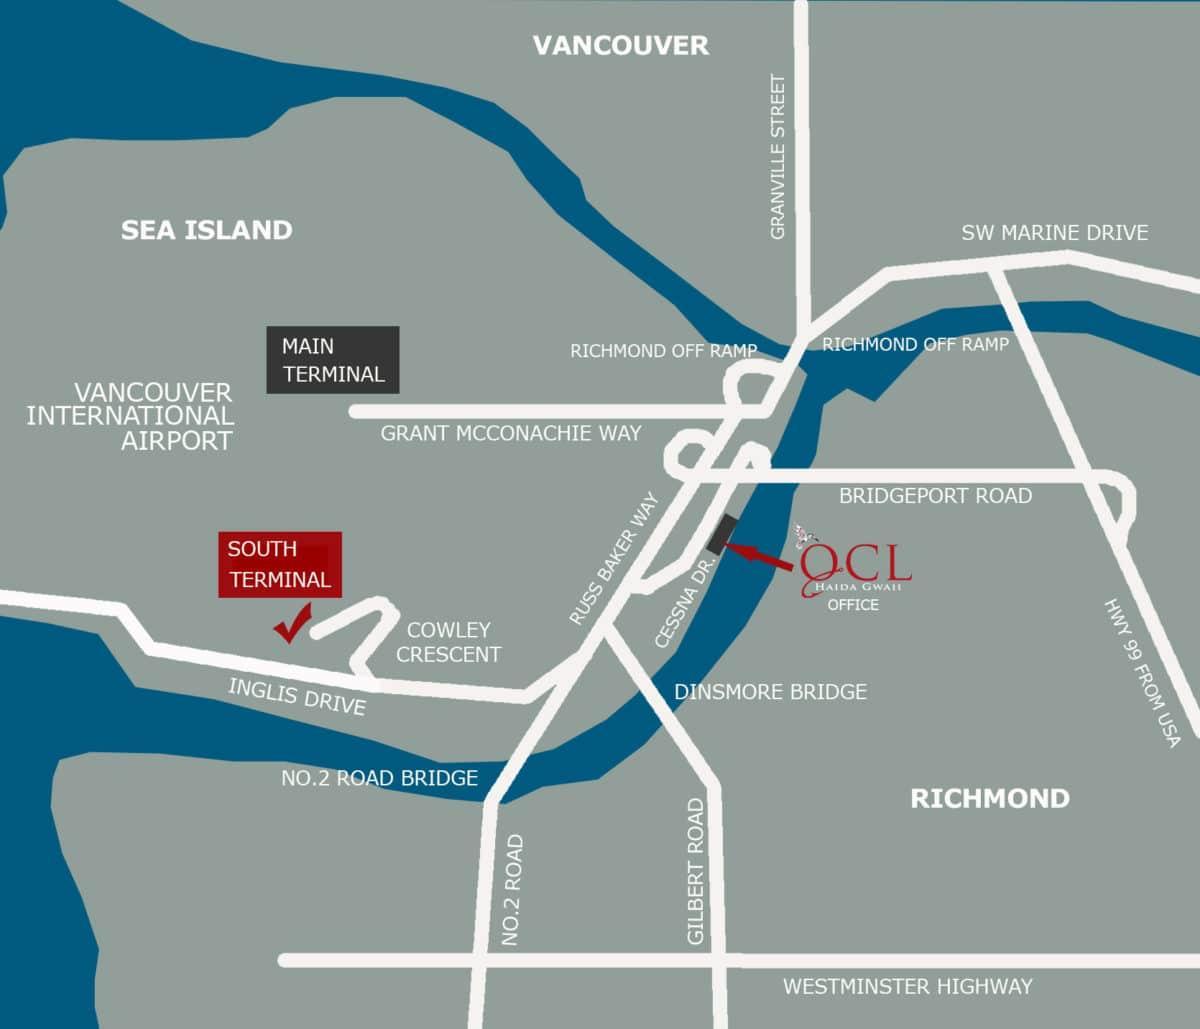 Kort over vancouver airport location